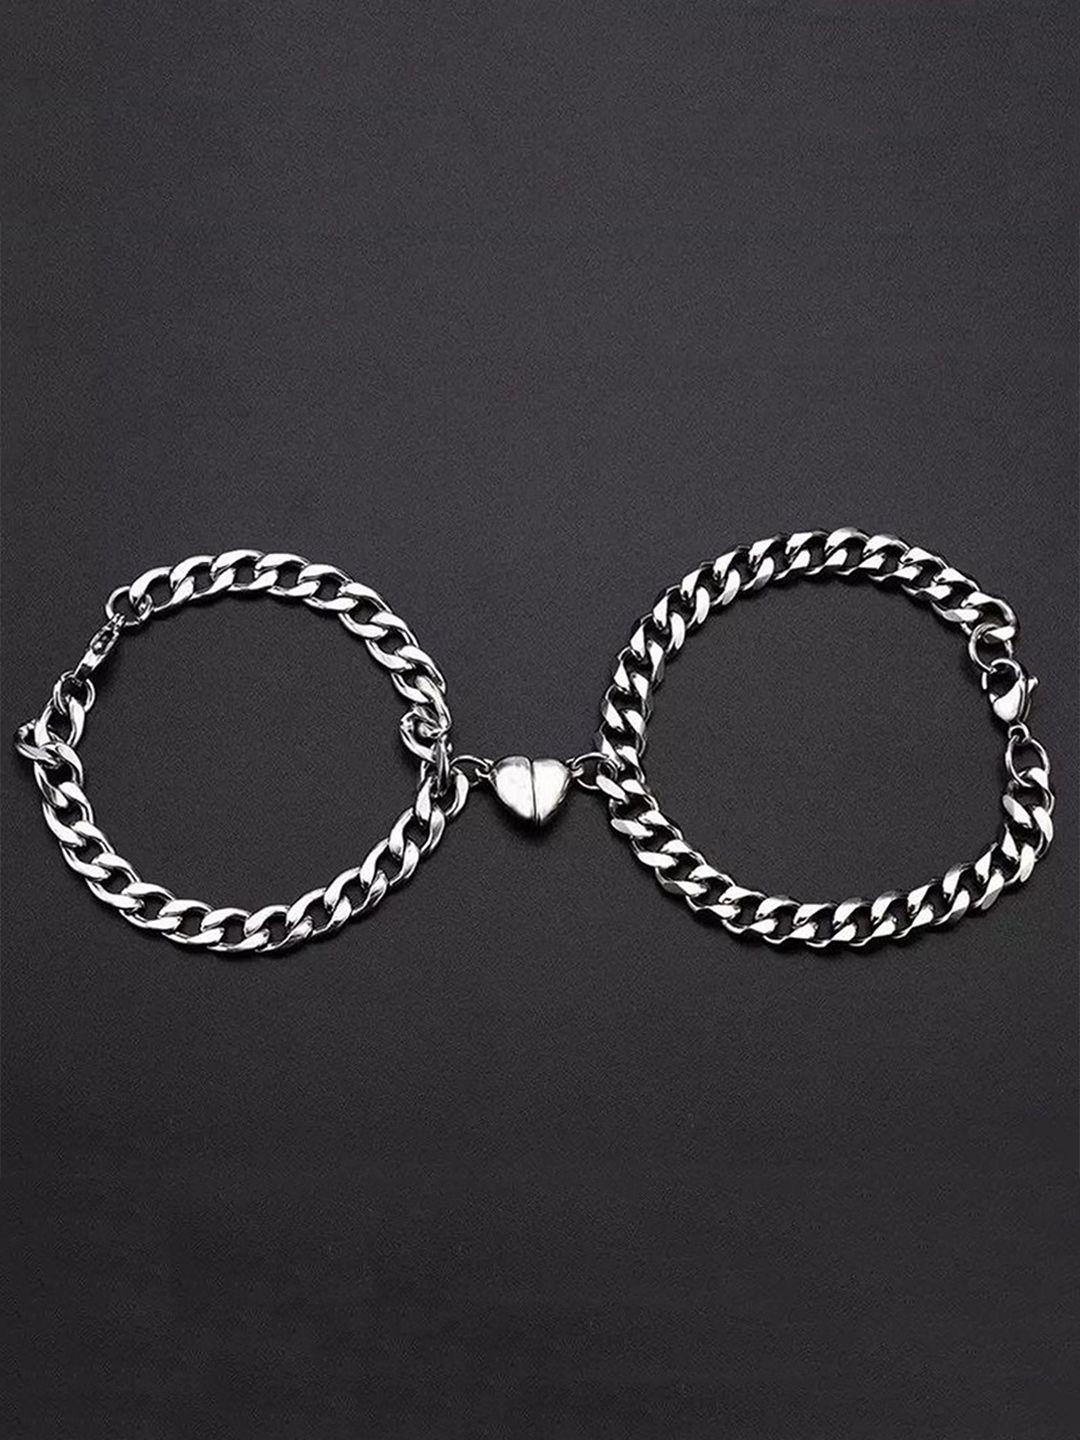 fashion frill set of 2 silver-plated charm bracelet